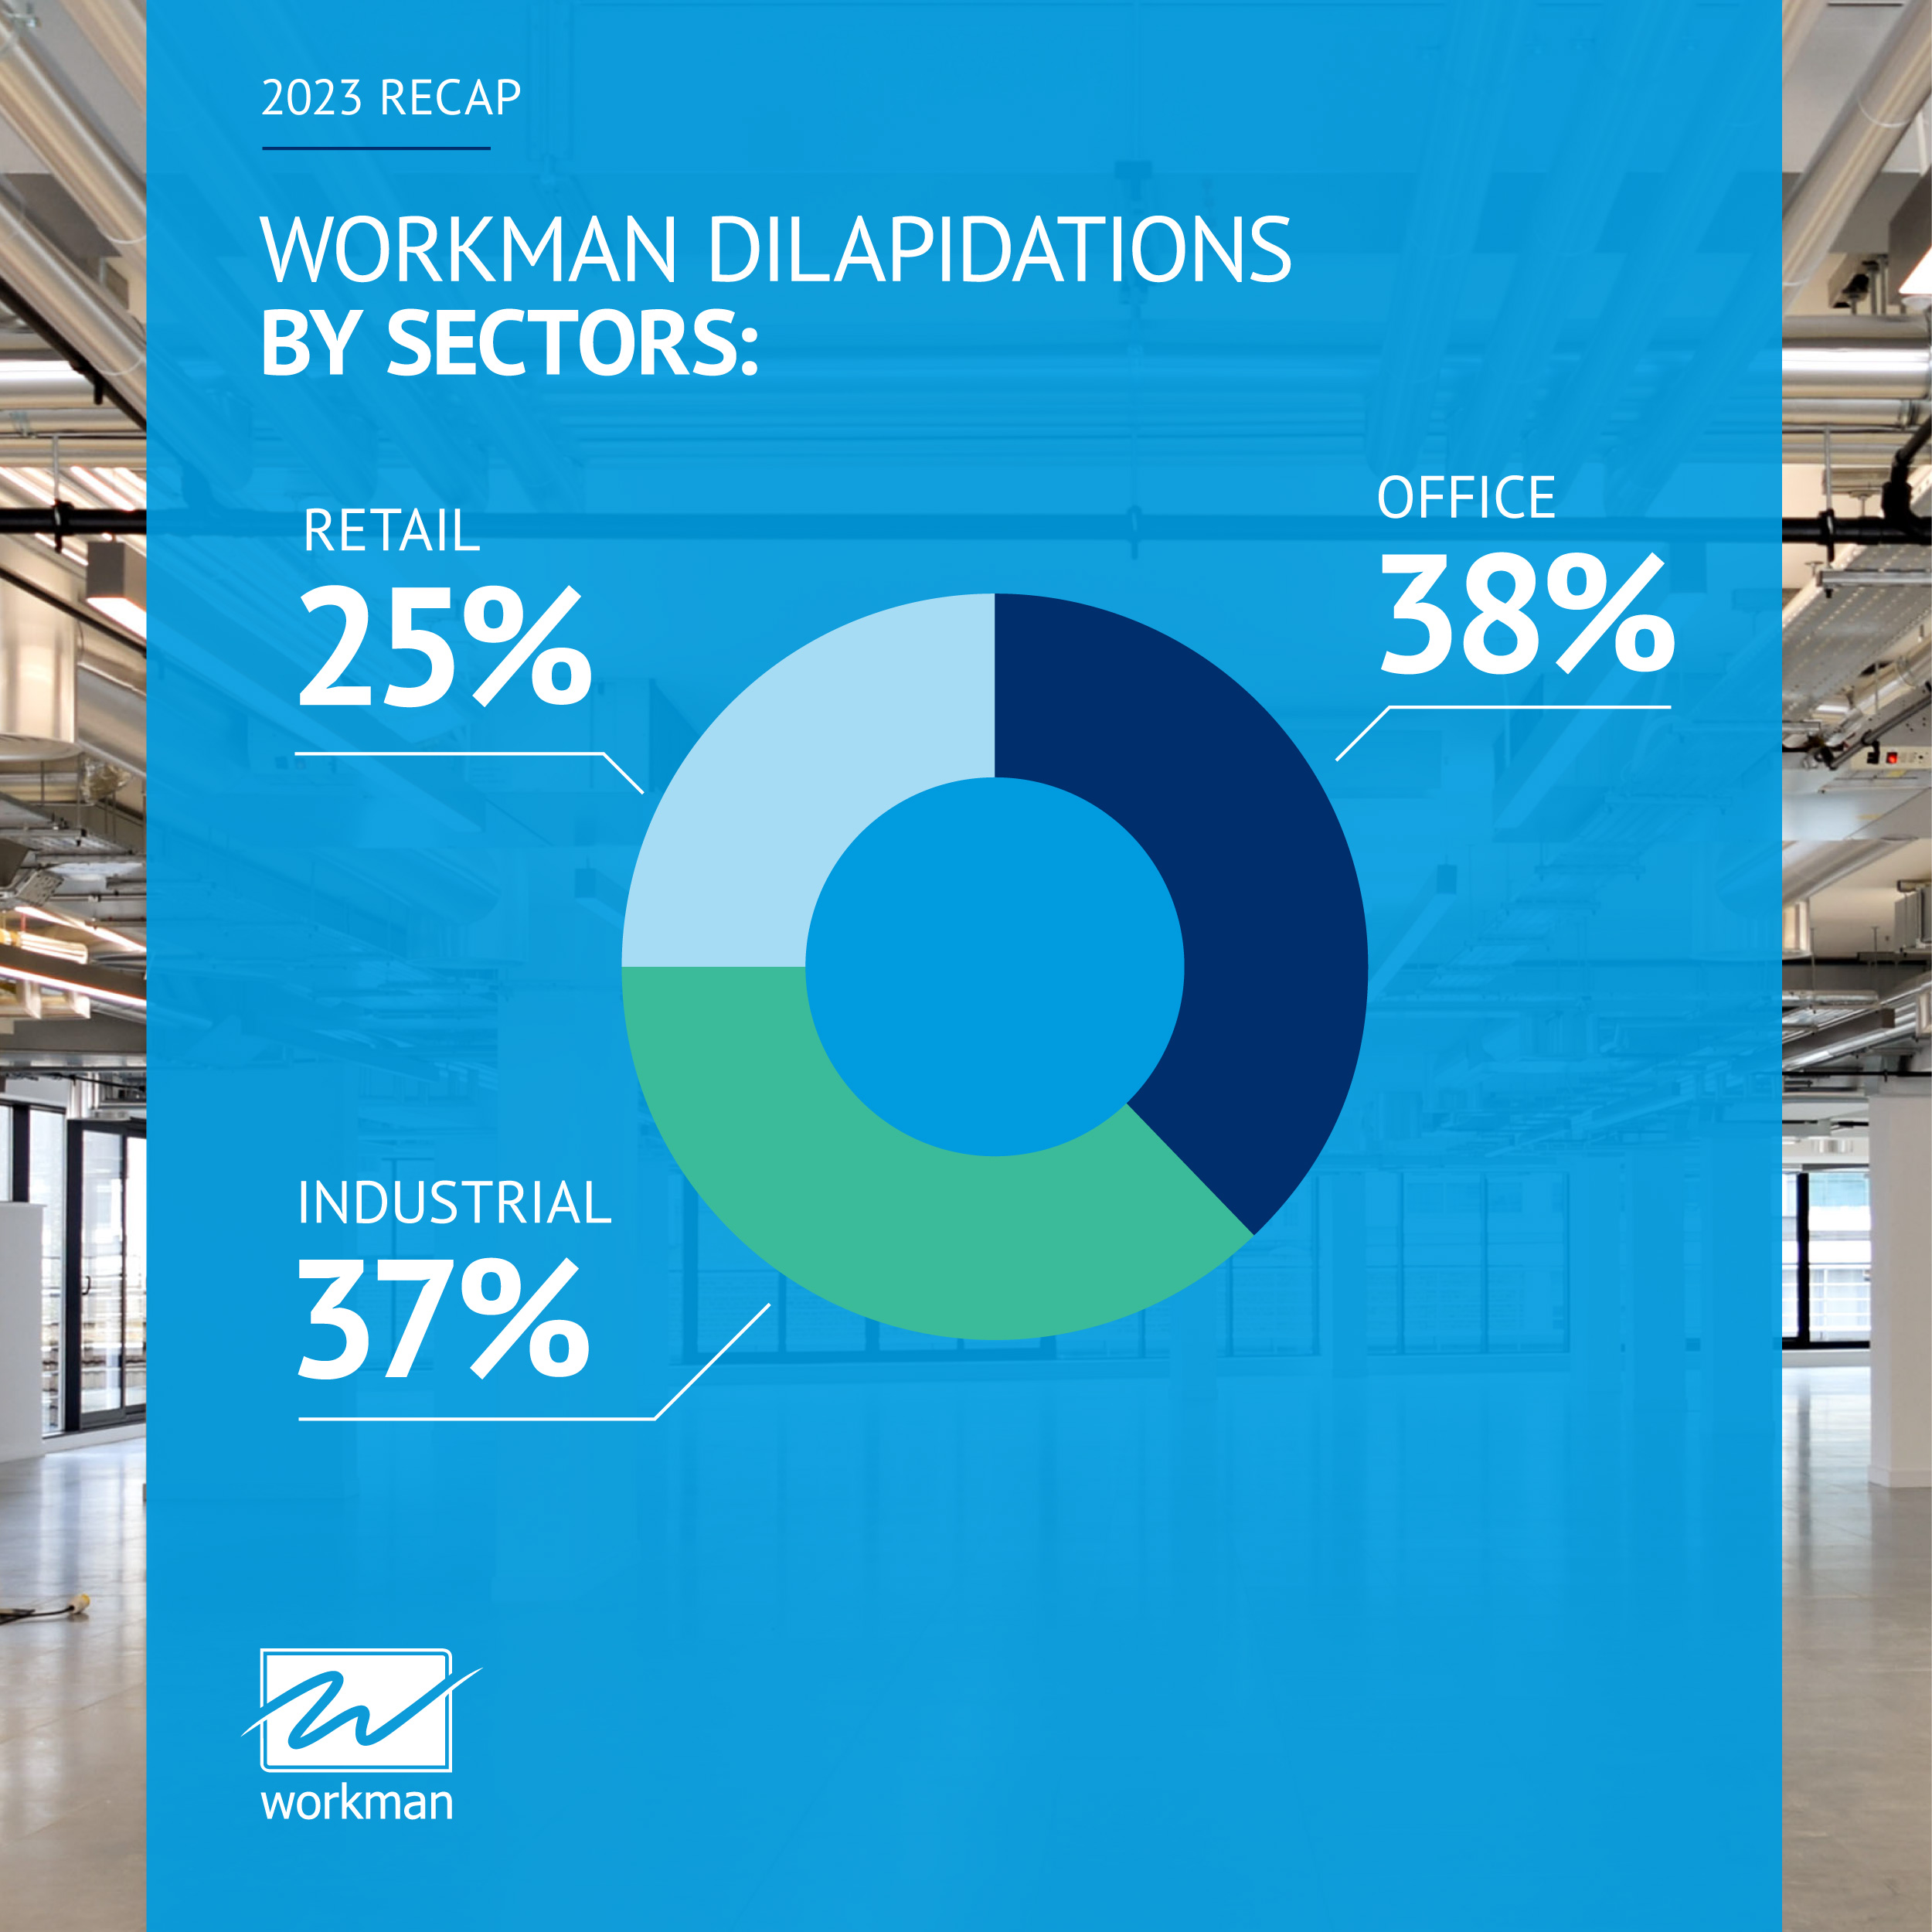 Workman dilapidations by sectors